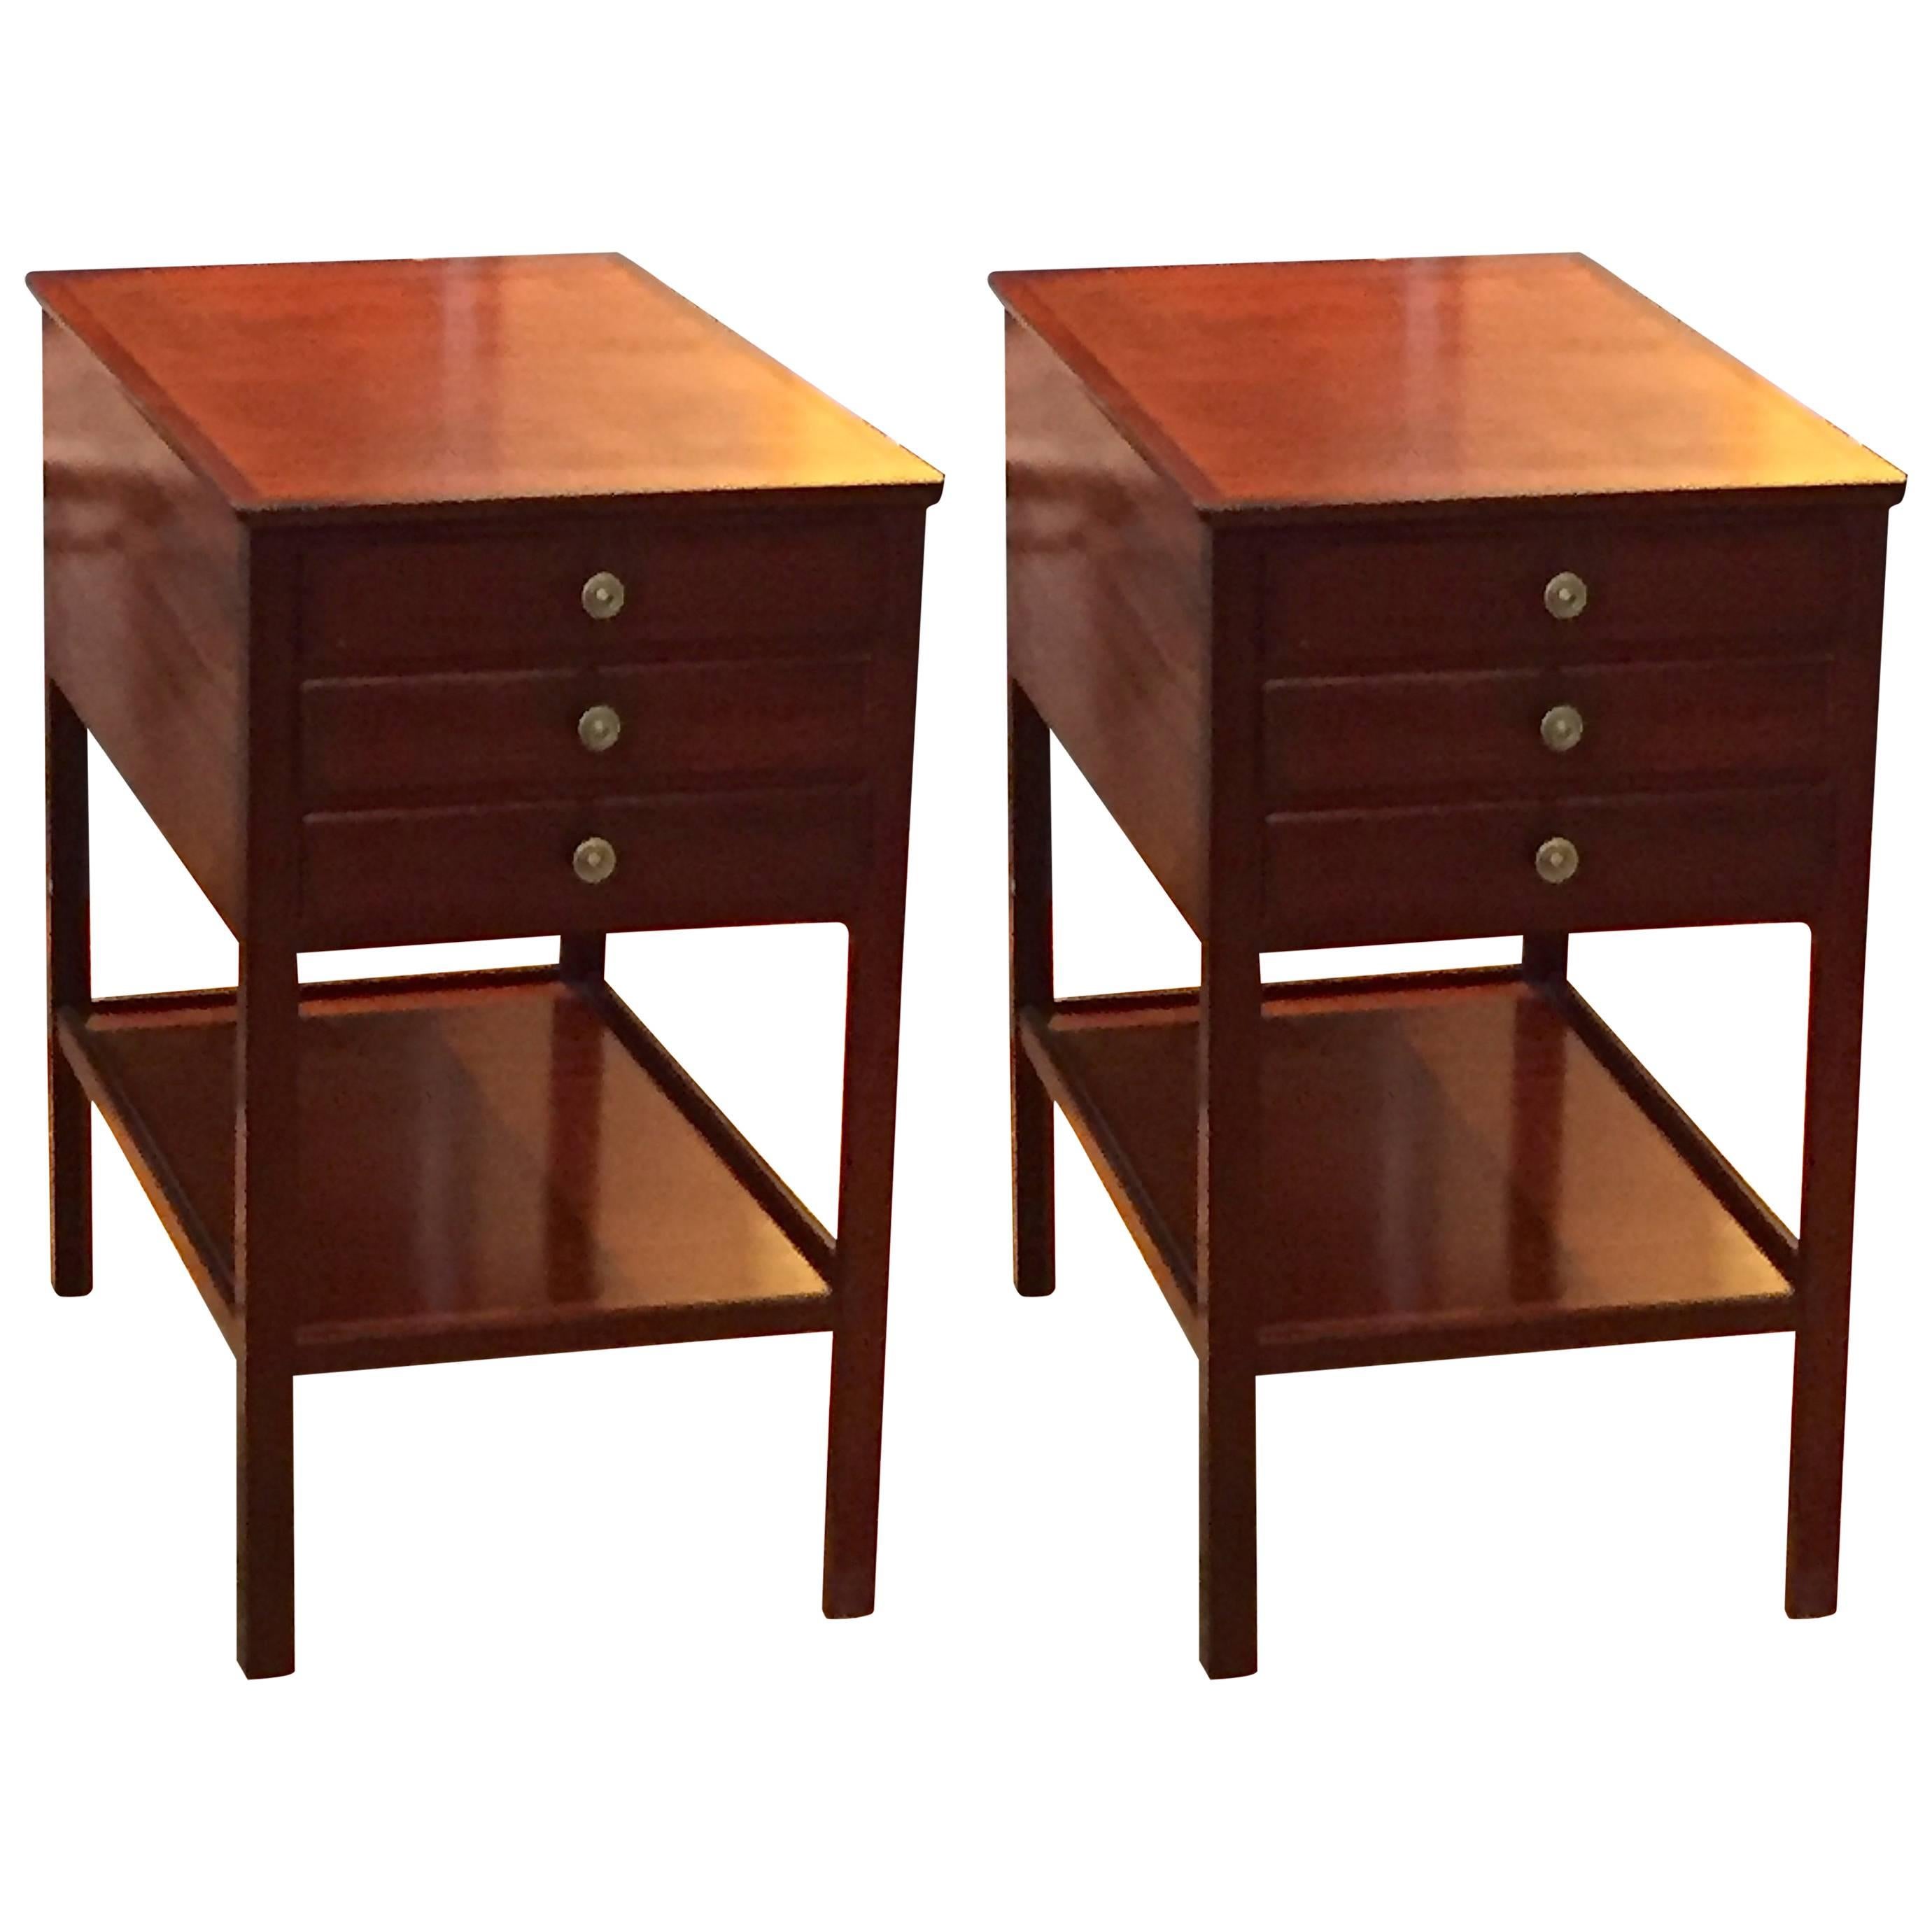 Rare Pair of Ole Wanscher End Tables for AJ Iversen